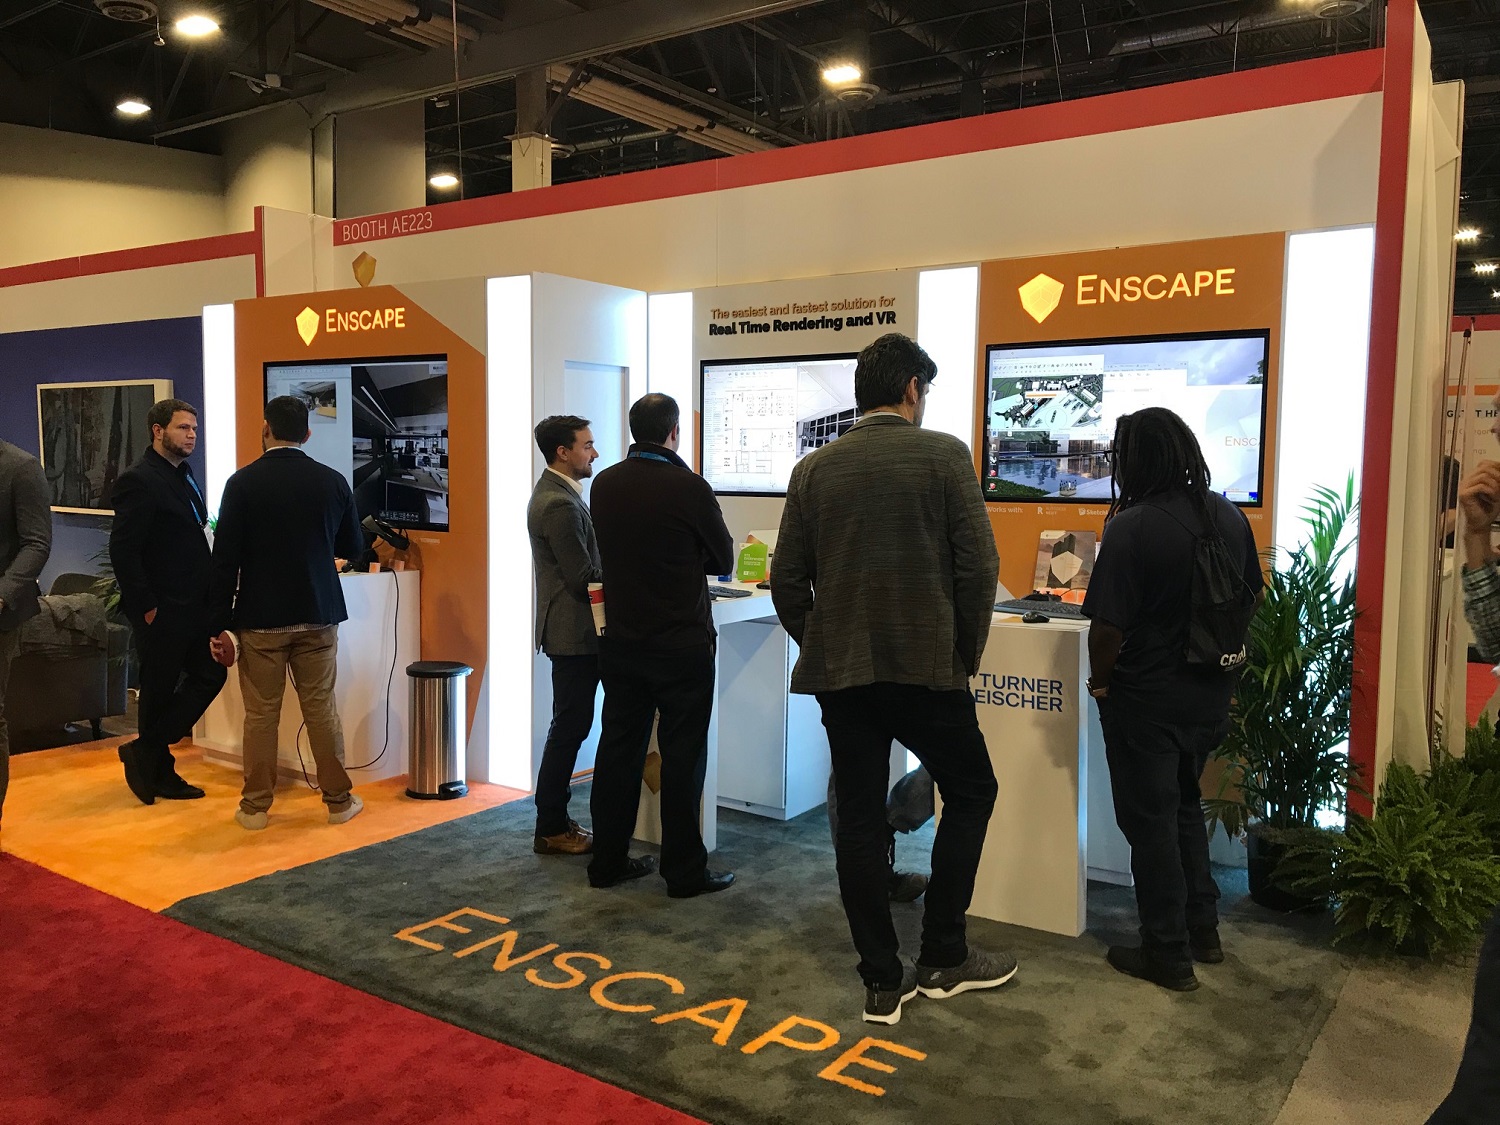 The Enscape Booth at Autodesk University 2019